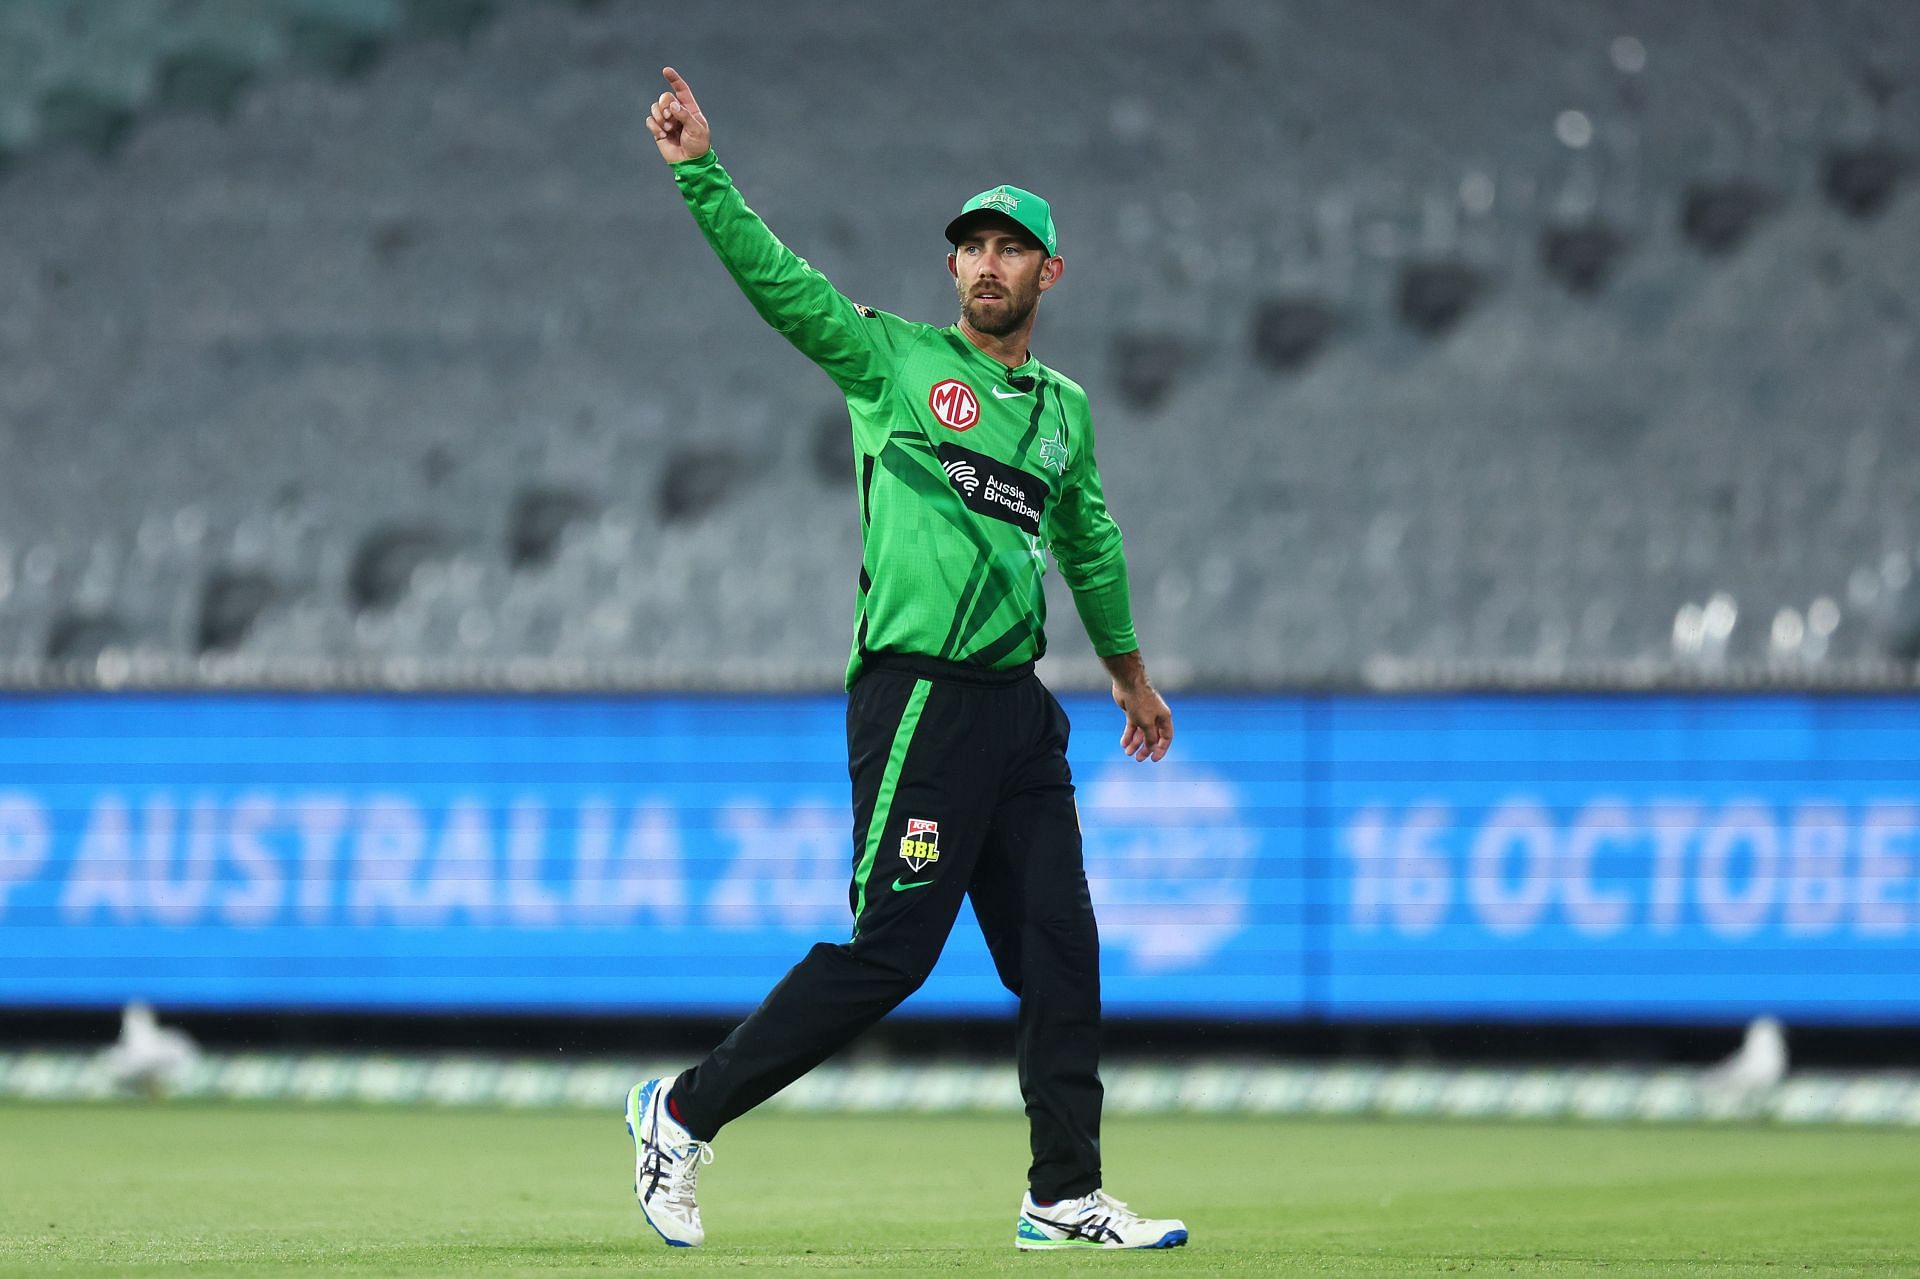 Maxwell was recently seen leading the Melbourne Stars in the BBL